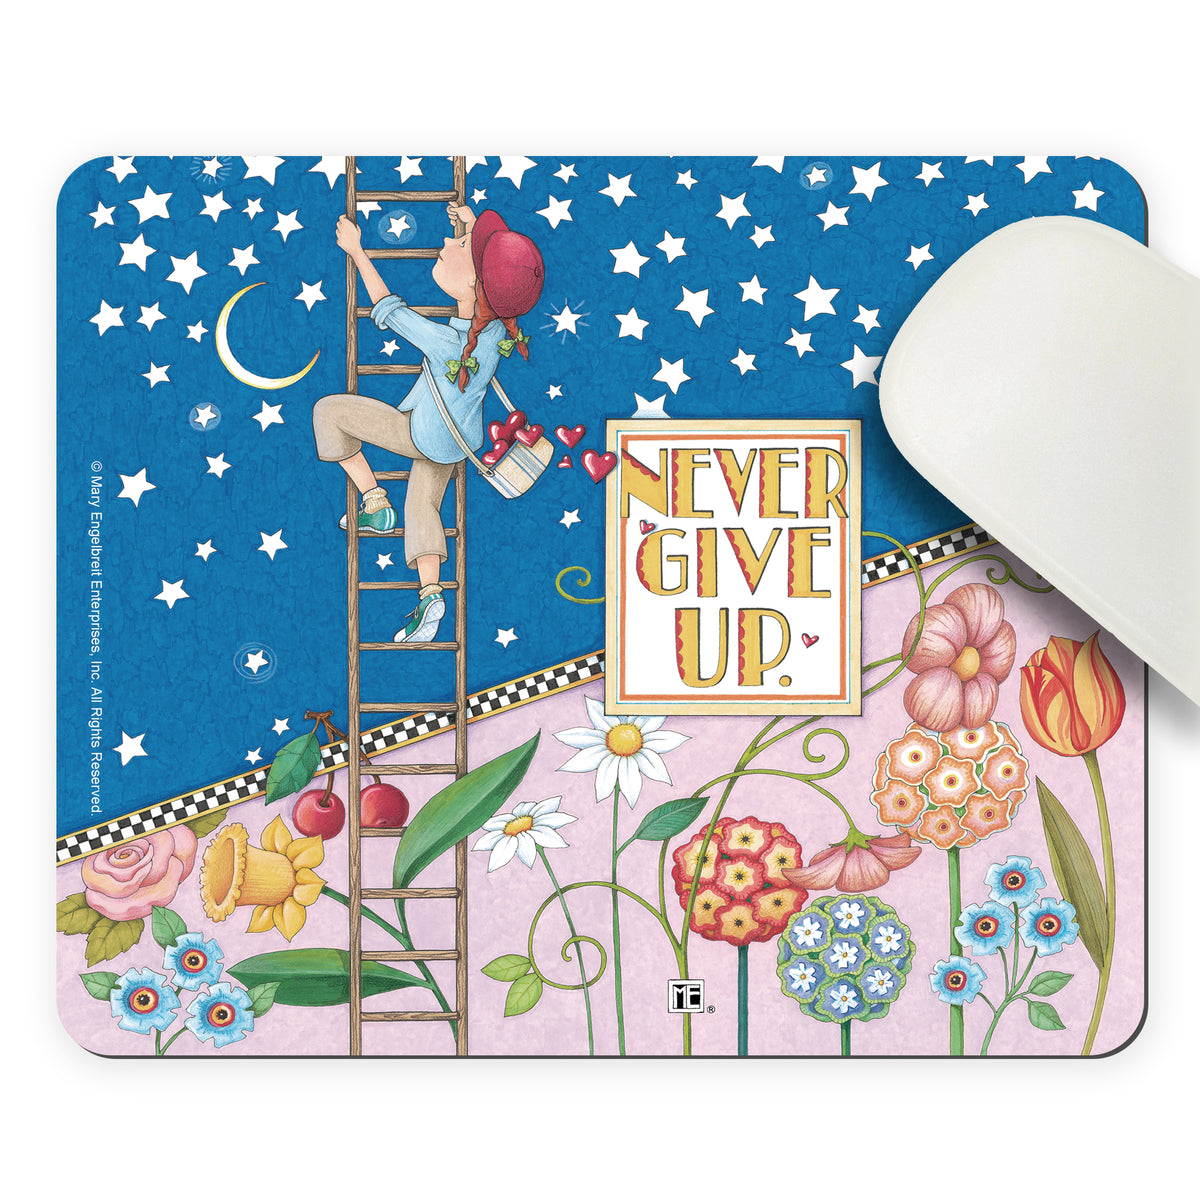 Never Give Up Mousepad